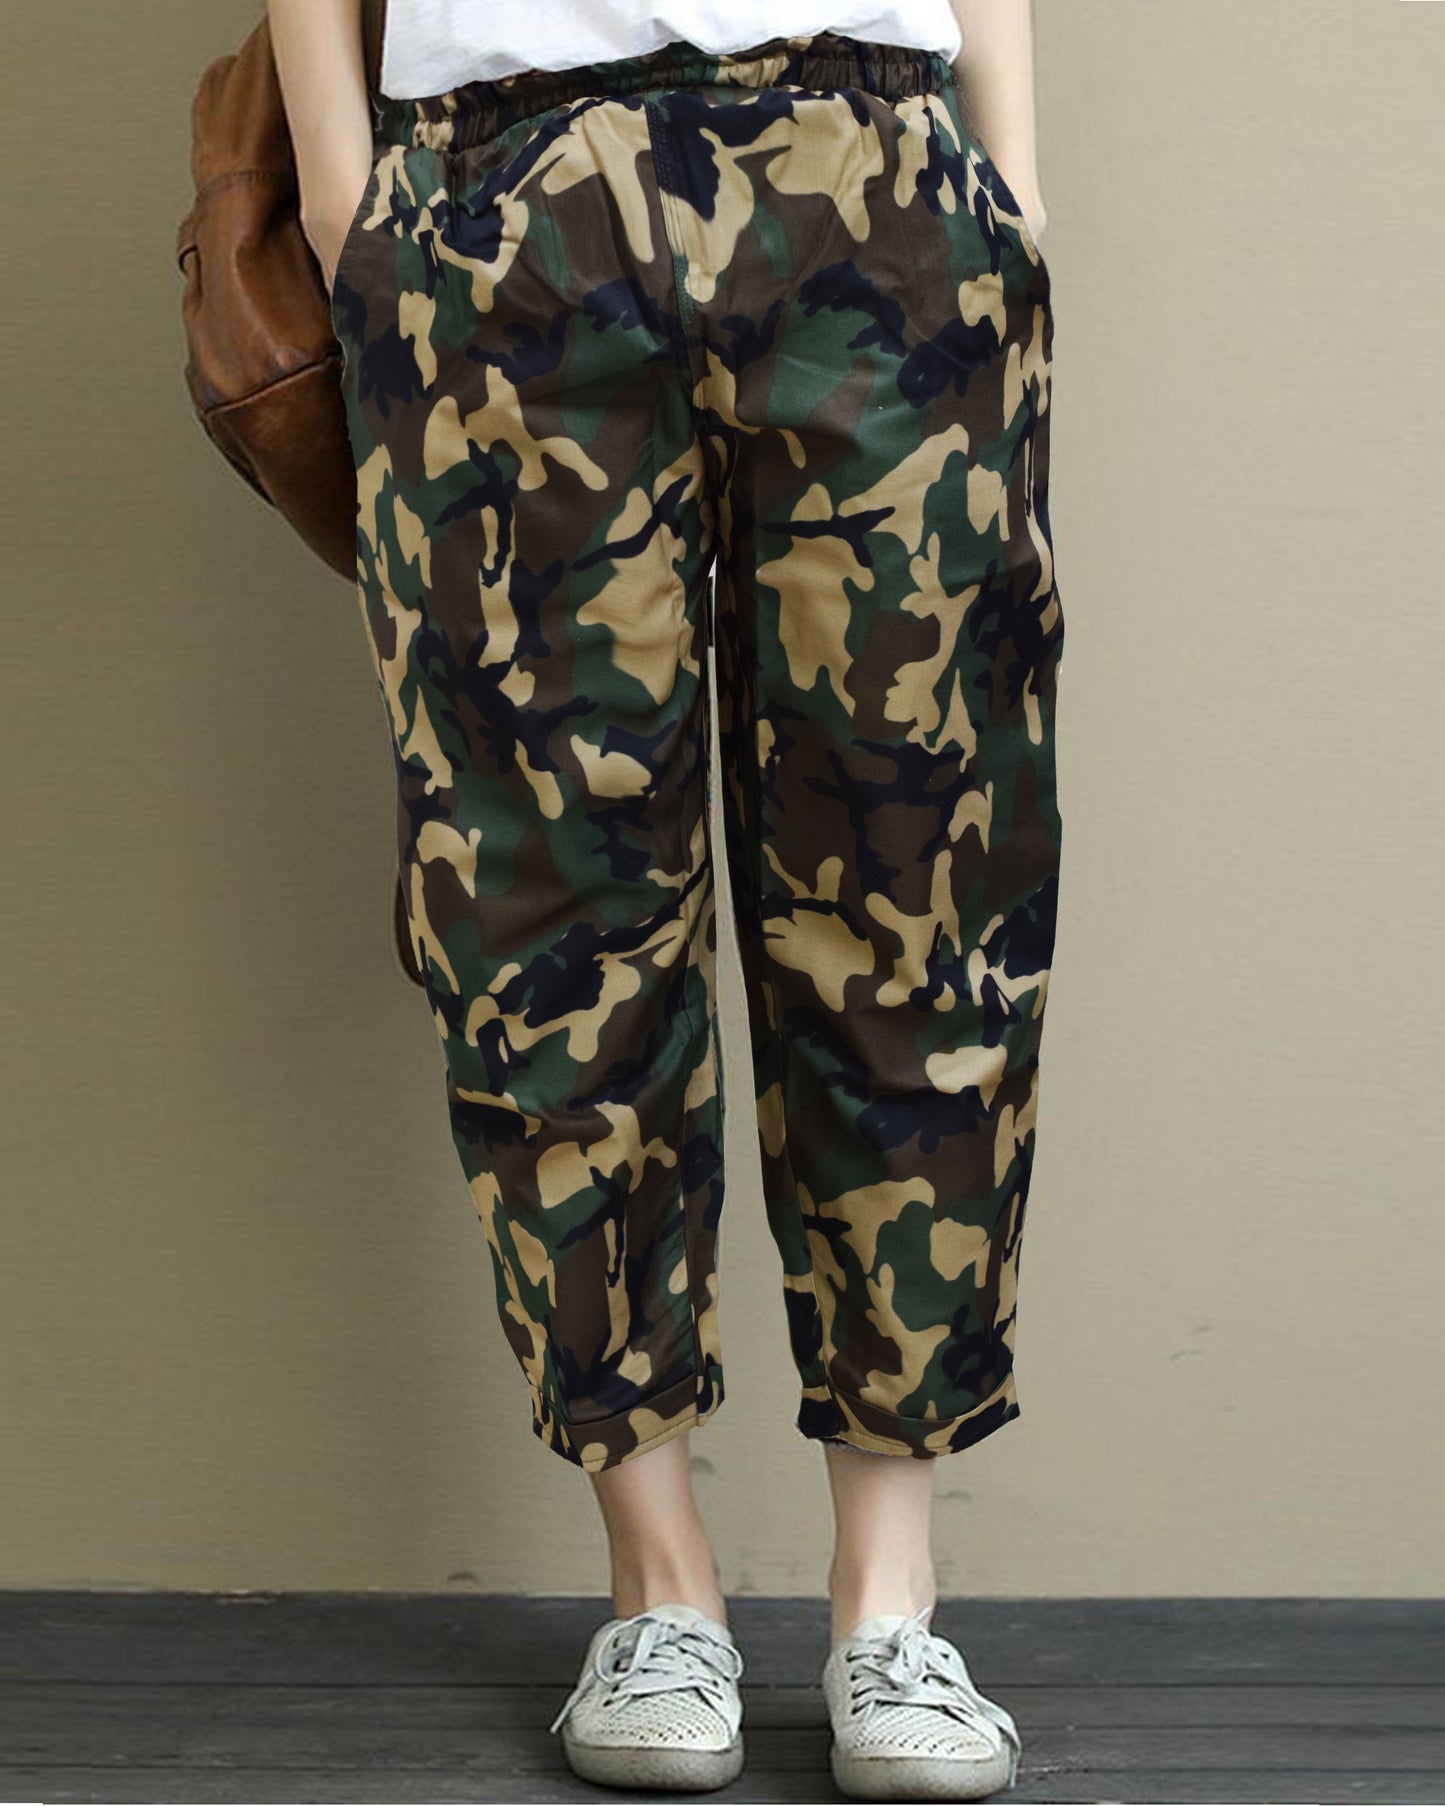 Vintage Olive Army Print & Camo Pajama Capri Combo Pack For Womens & Girls(Pack Of 2 Pcs)